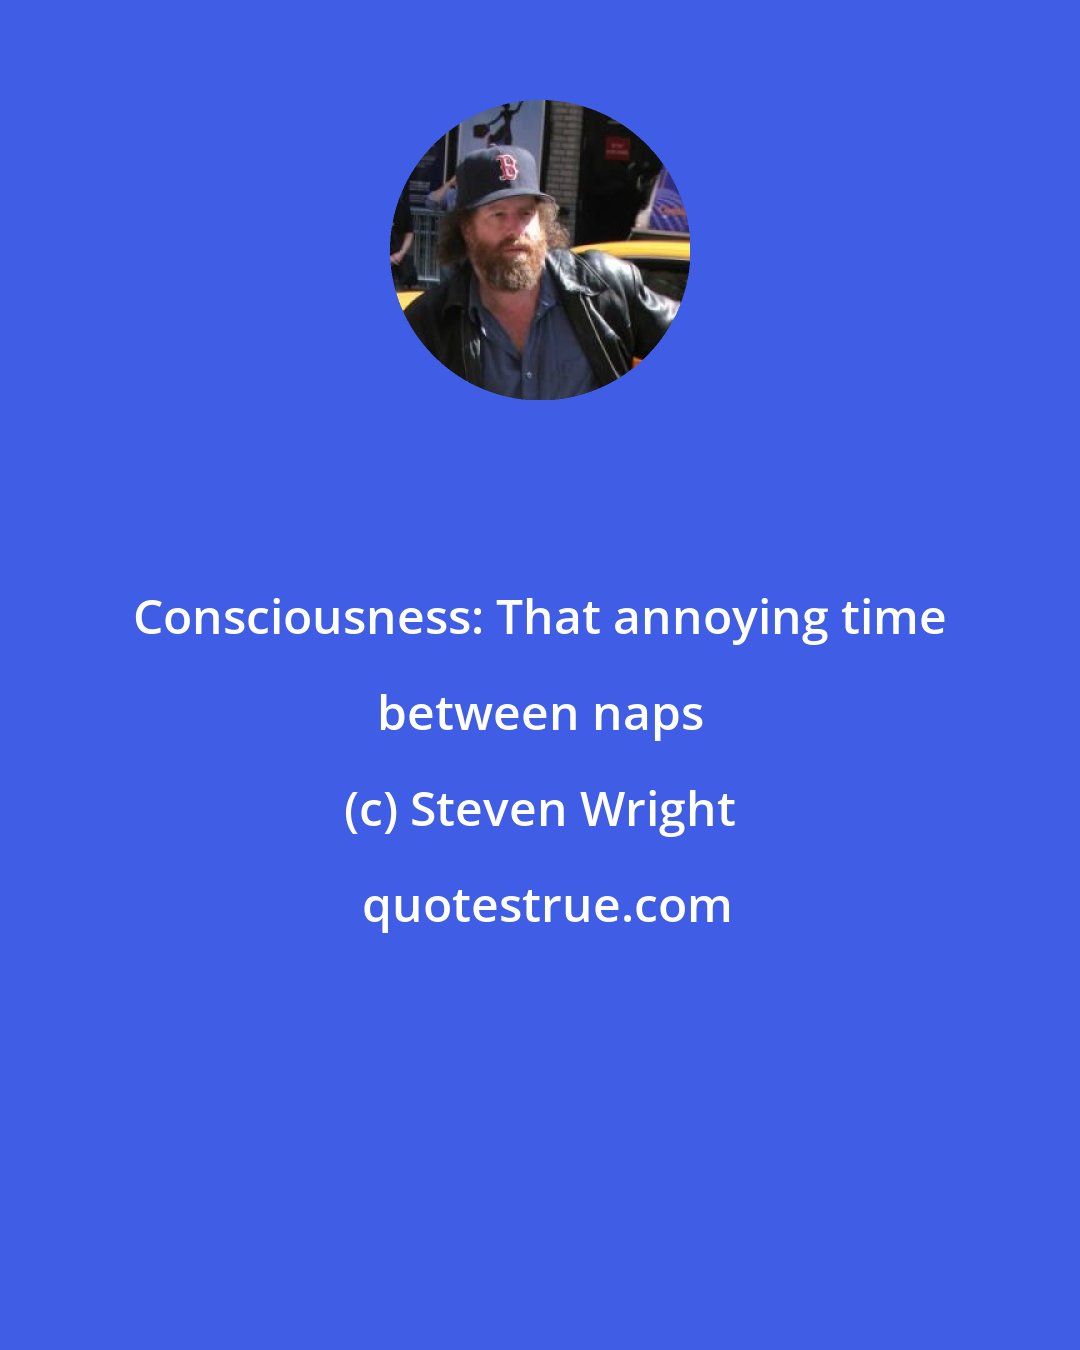 Steven Wright: Consciousness: That annoying time between naps